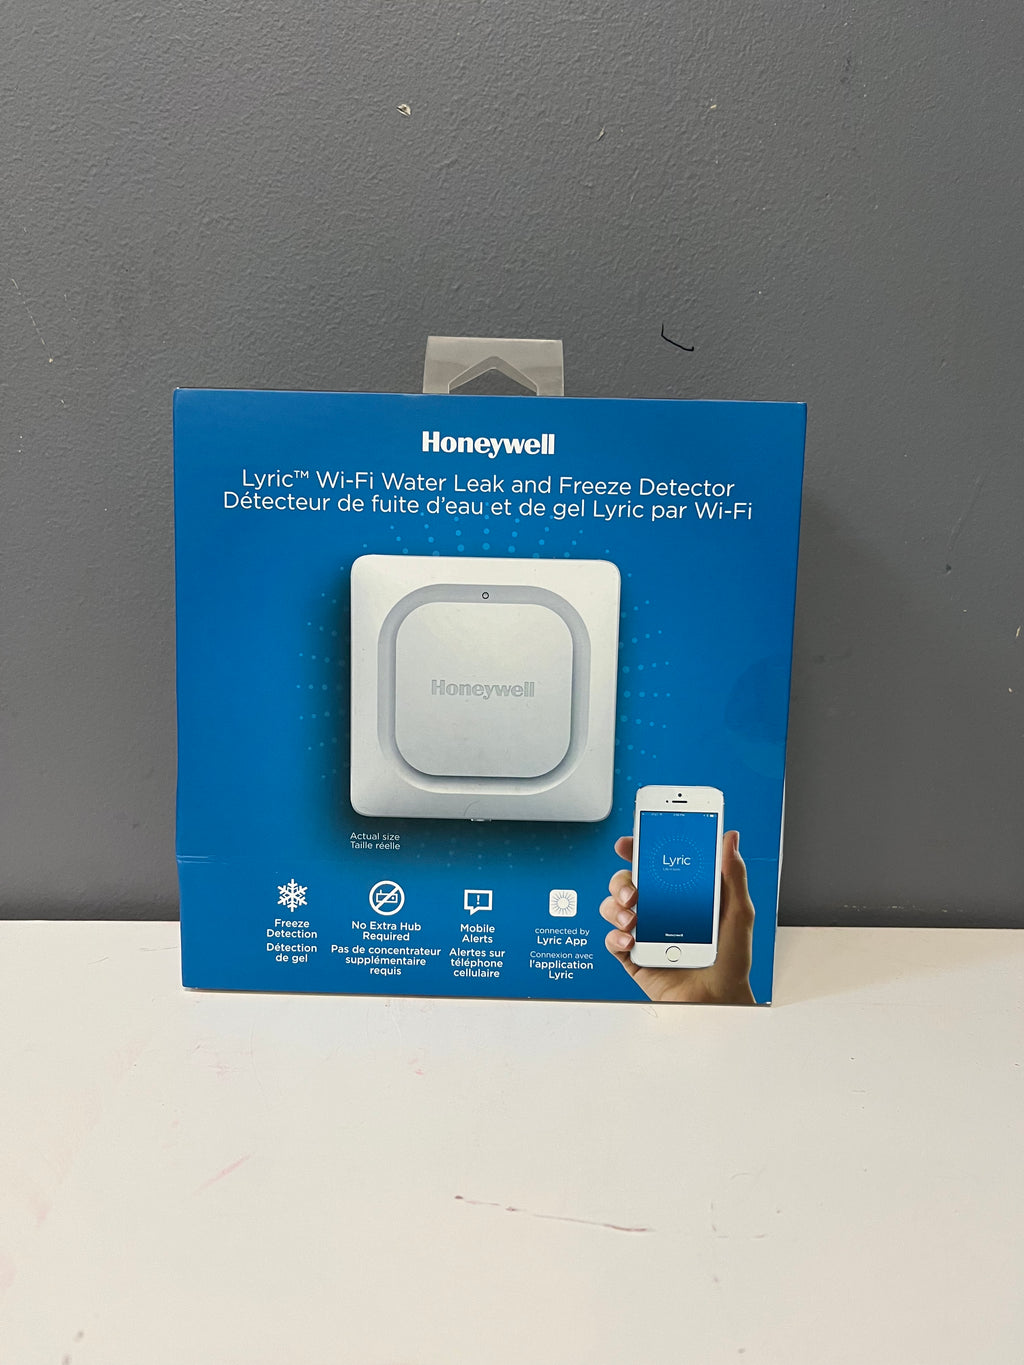 Wi-Fi Water Leak And Freeze Detector